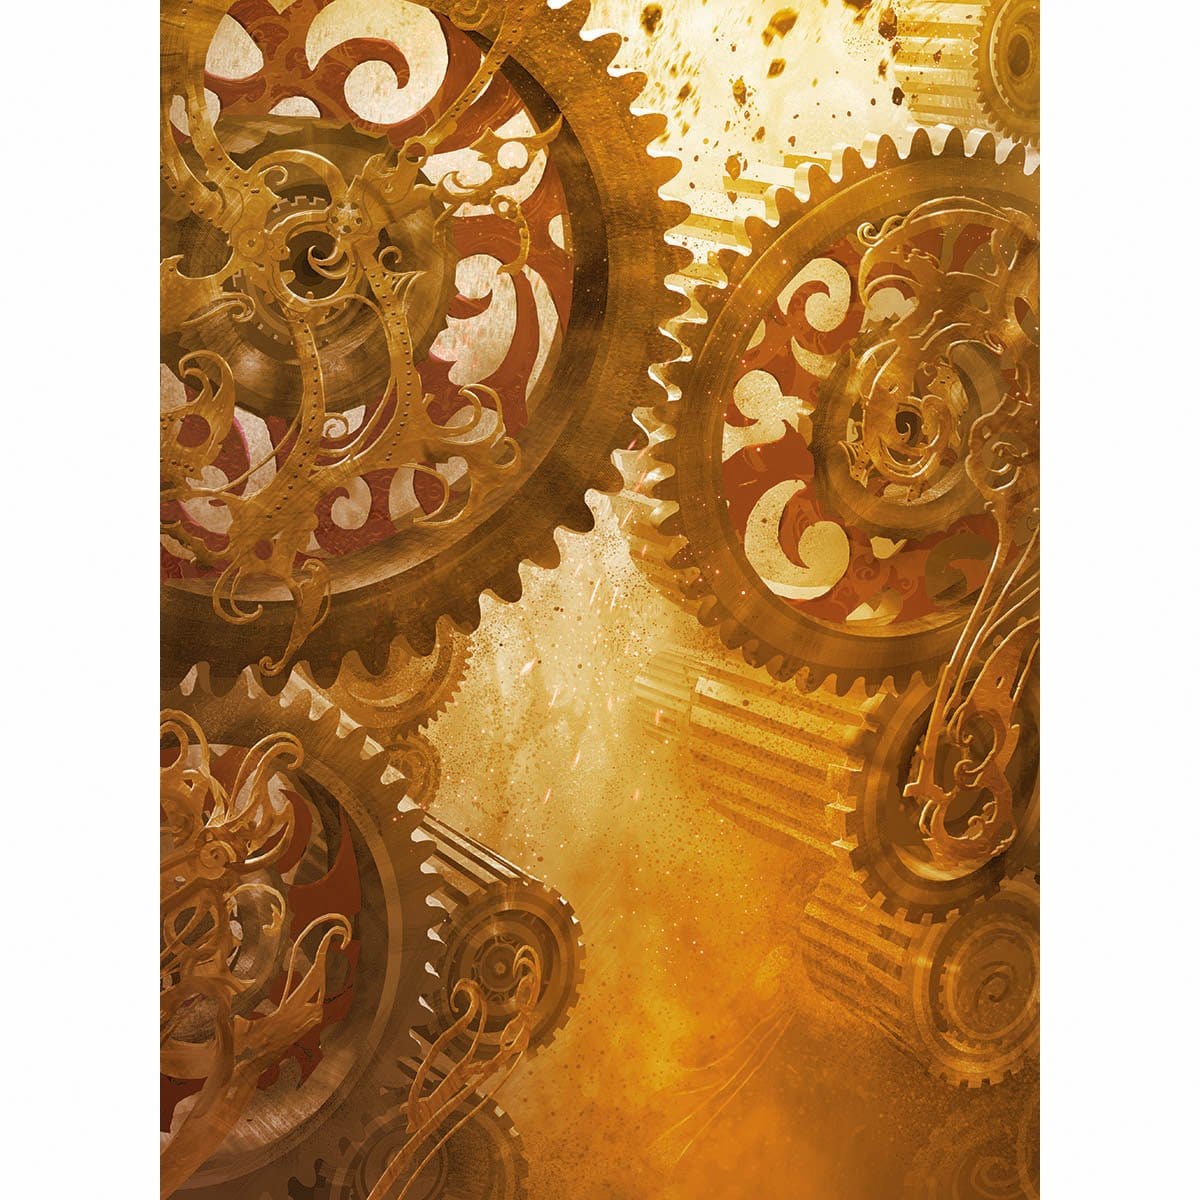 Grindstone Print - Print - Original Magic Art - Accessories for Magic the Gathering and other card games